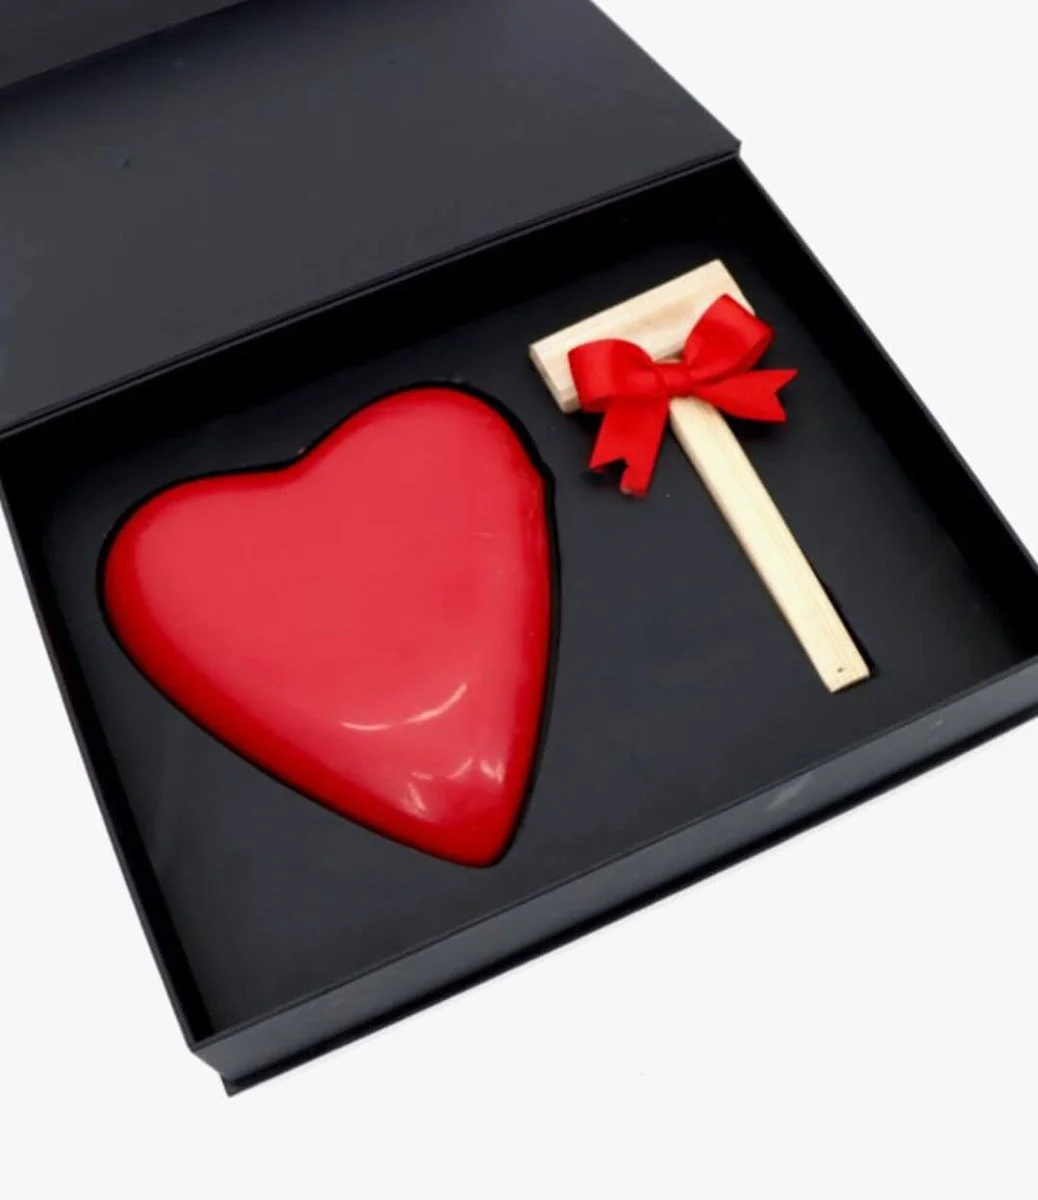 Valentine's Day Chocolate Luxury Box With Heart Shaped Chocolate And Hammer By Le Chocolatier Dubai